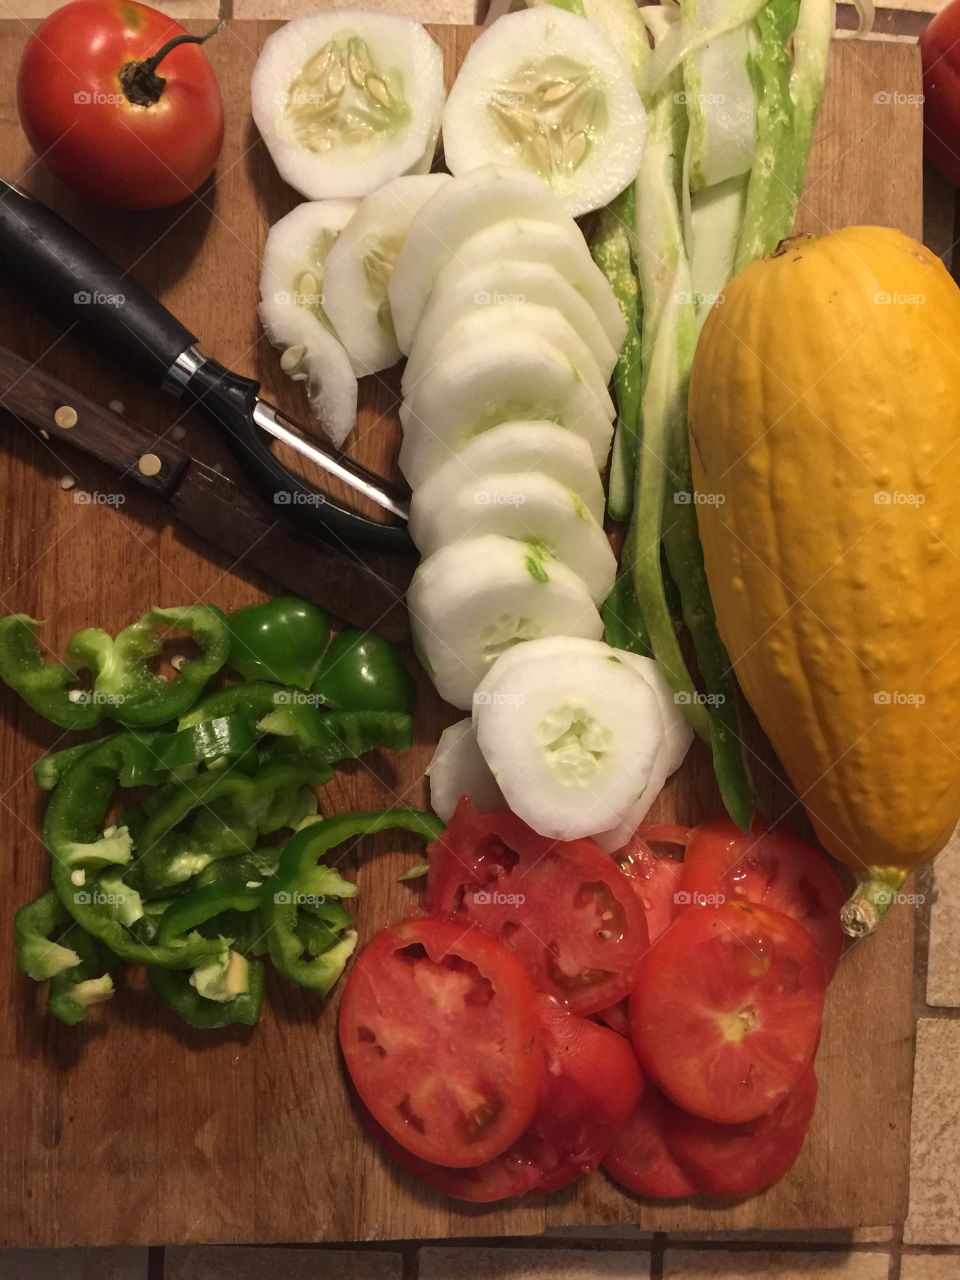 Squash, green peppers, tomatoes and cucumbers for tonight's hamburgers for supper